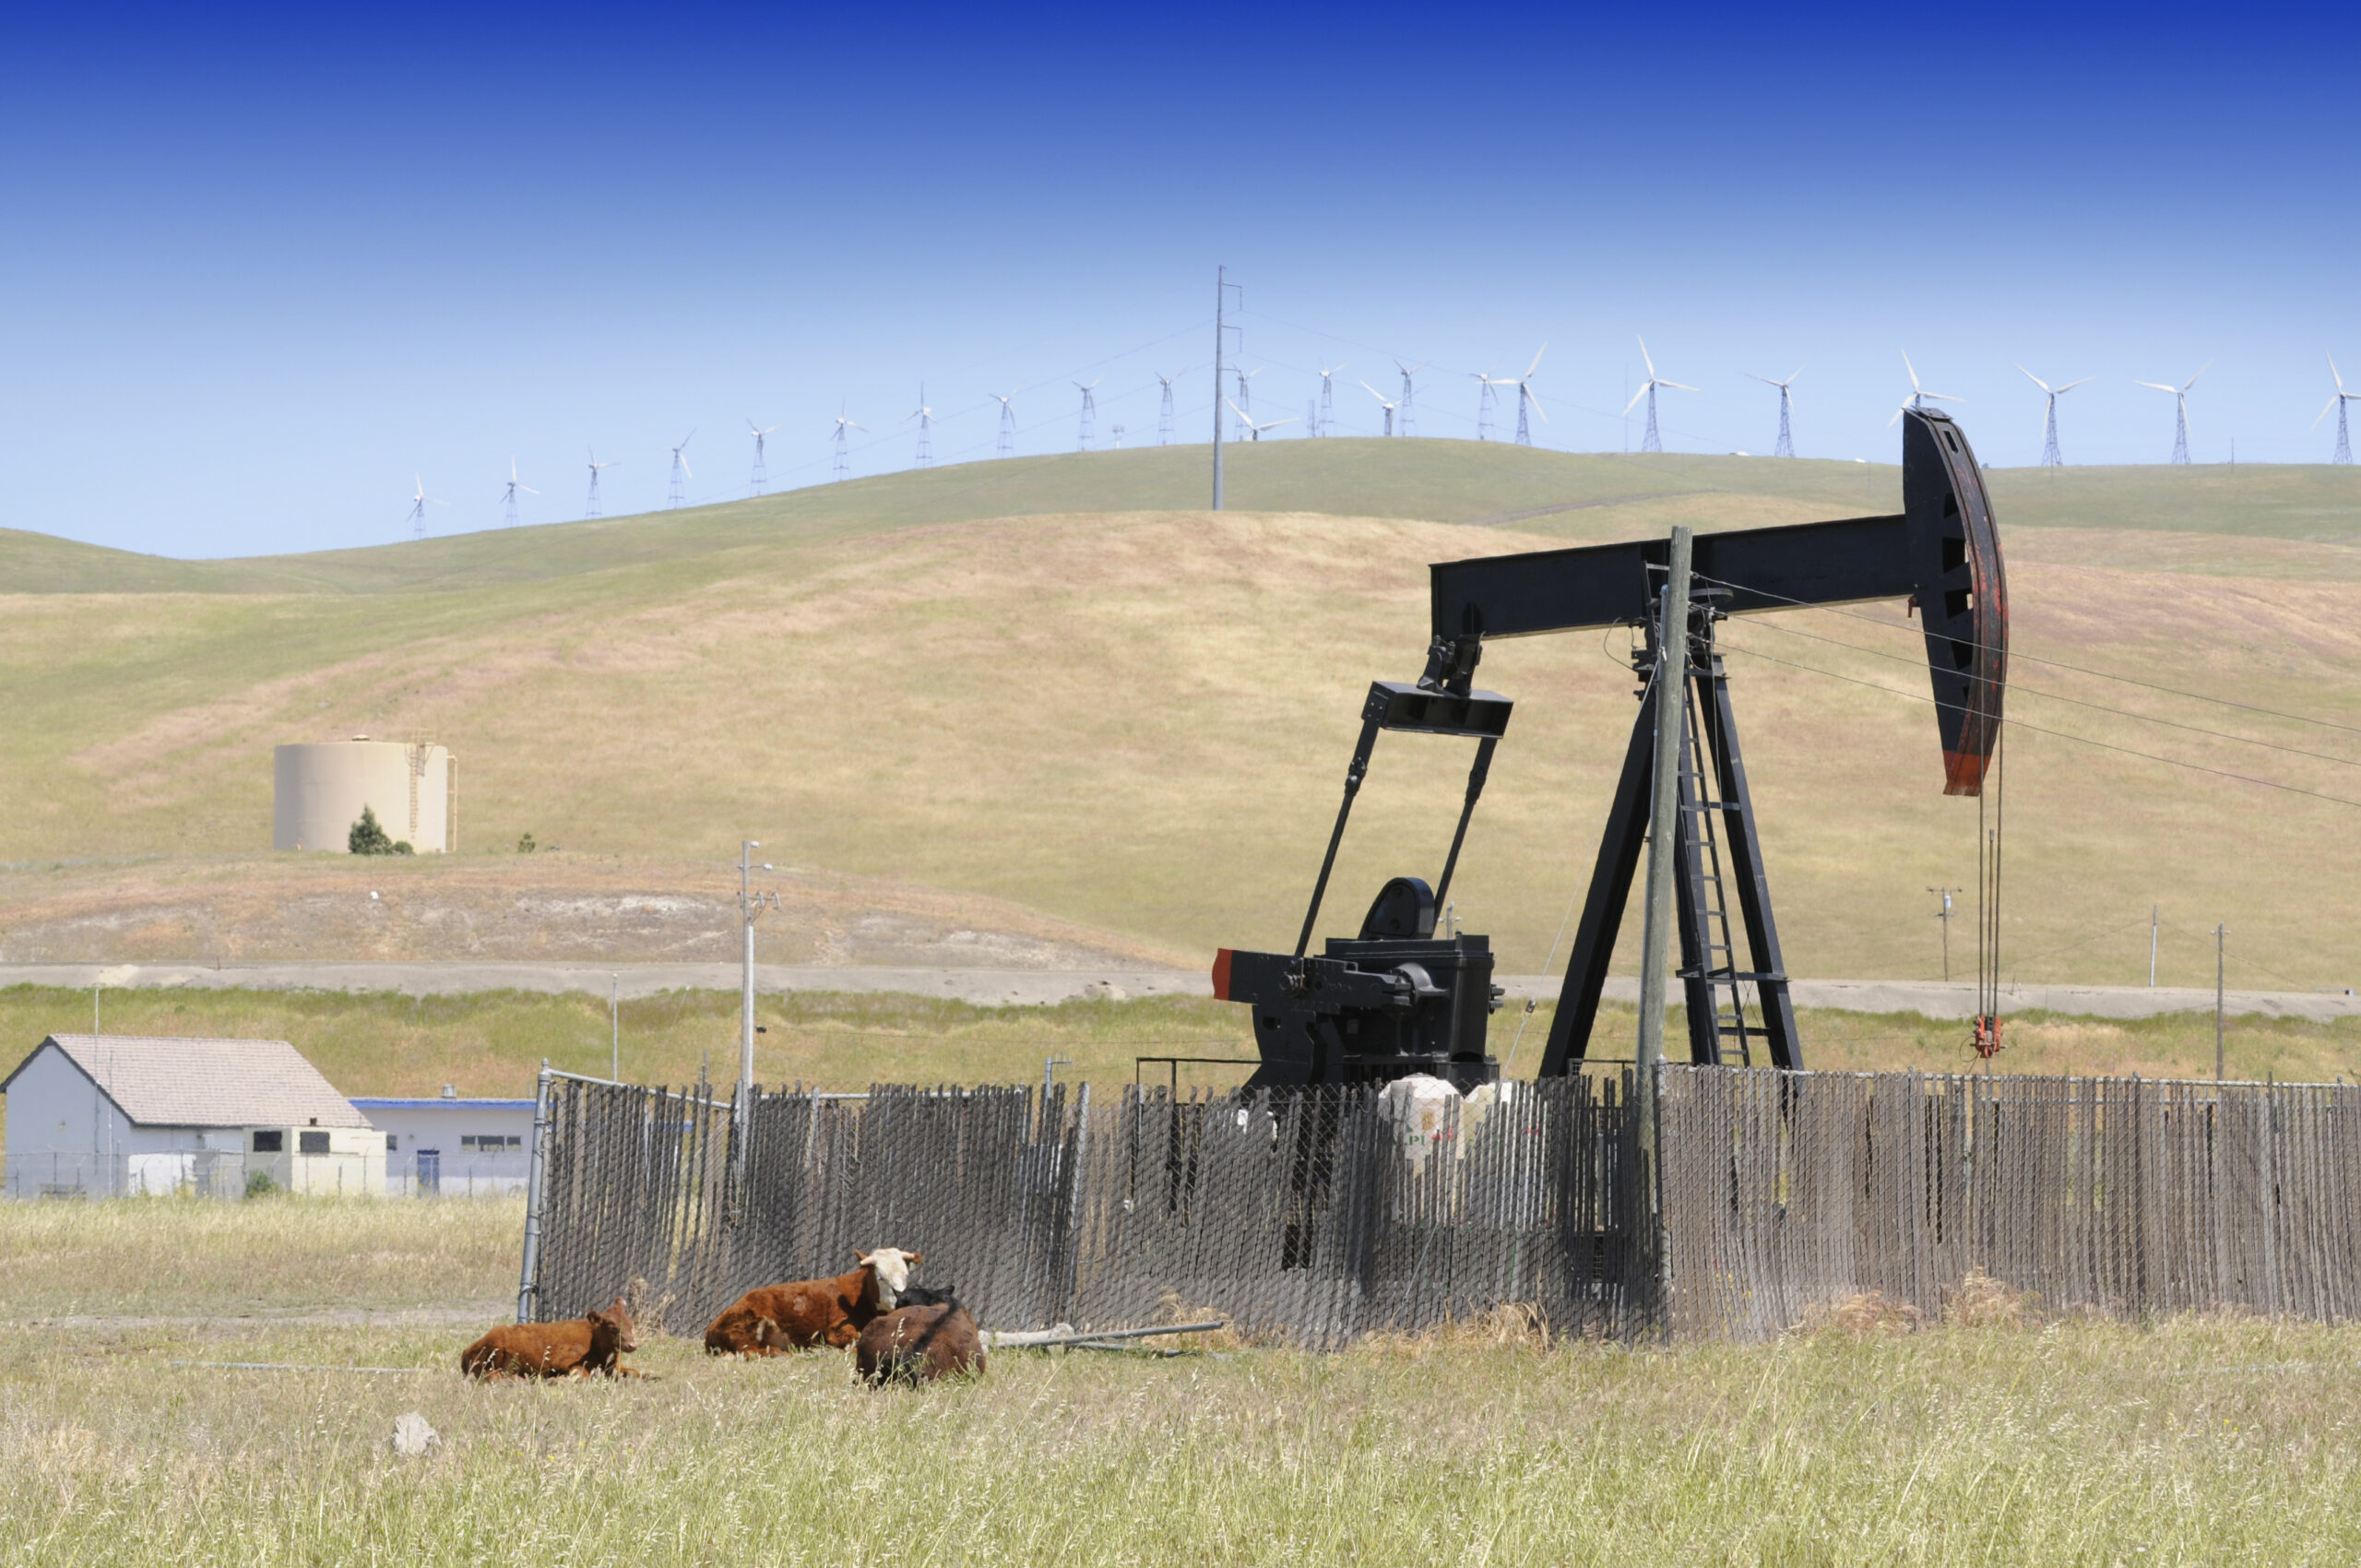 Cattle-next-to-pump-jack-scaled